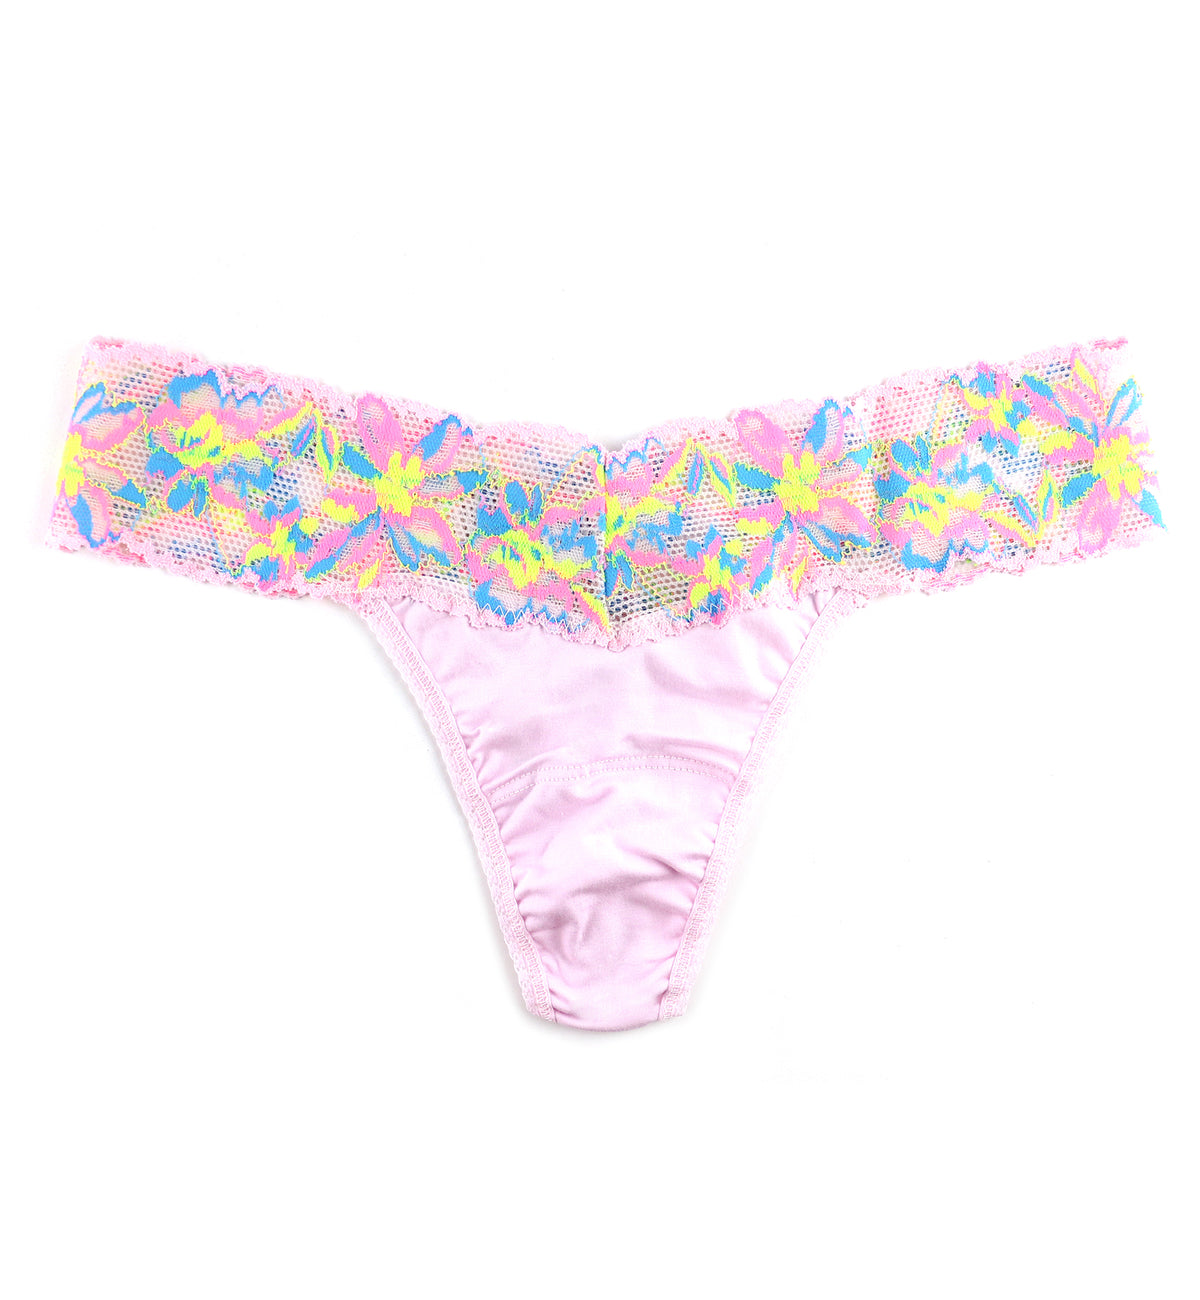 Hanky Panky Neon Lights Cotton-Spandex Low Rise Thong (891592),Pink Multi - Pink Multi,One Size